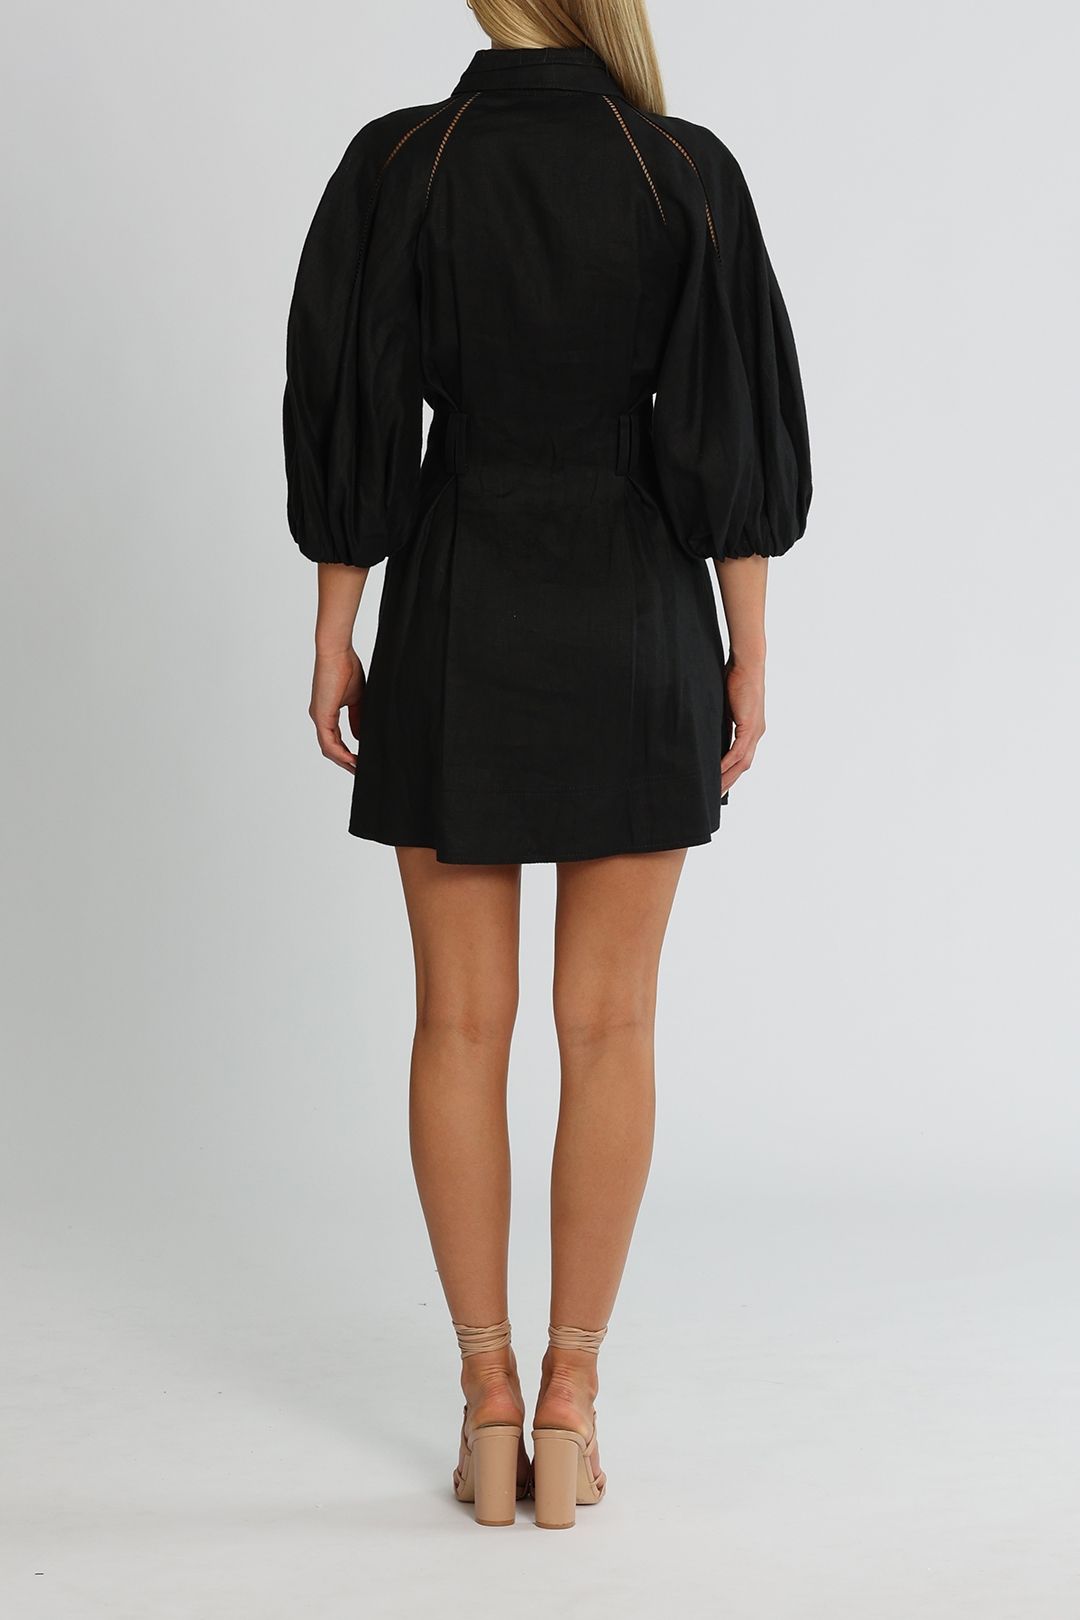 AJE Recurrence Button Up Dress Black Lace